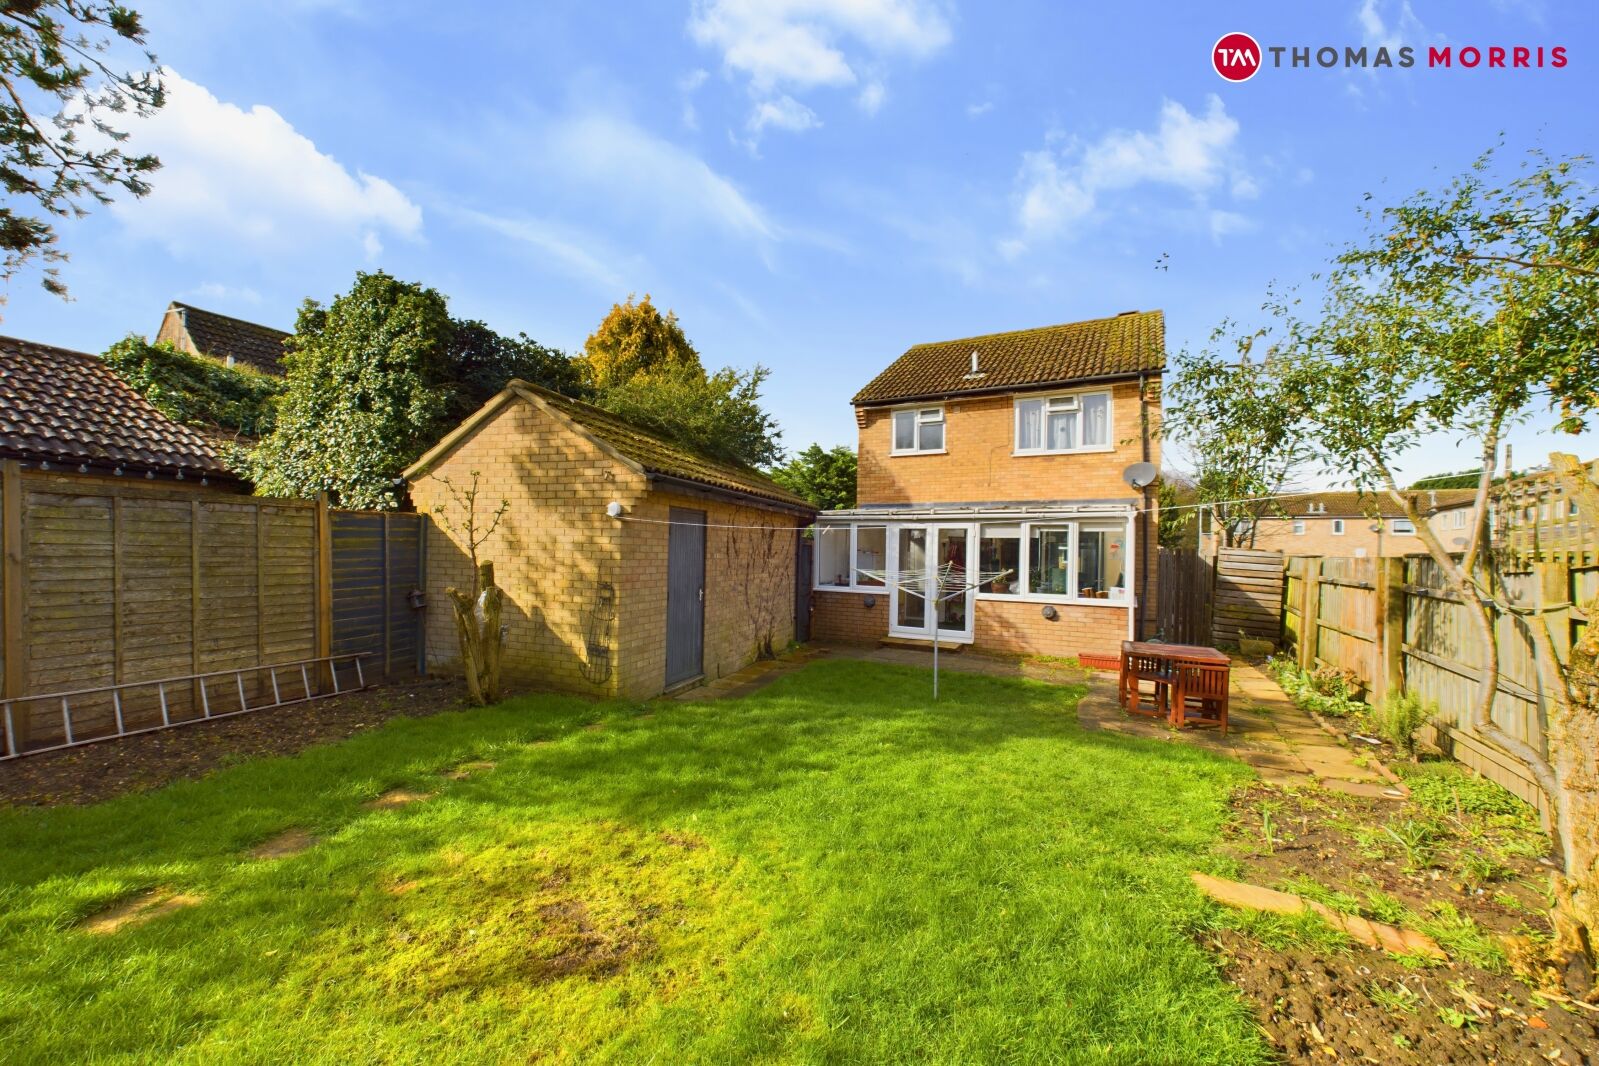 3 bedroom detached house for sale Peate Close, Godmanchester, PE29, main image